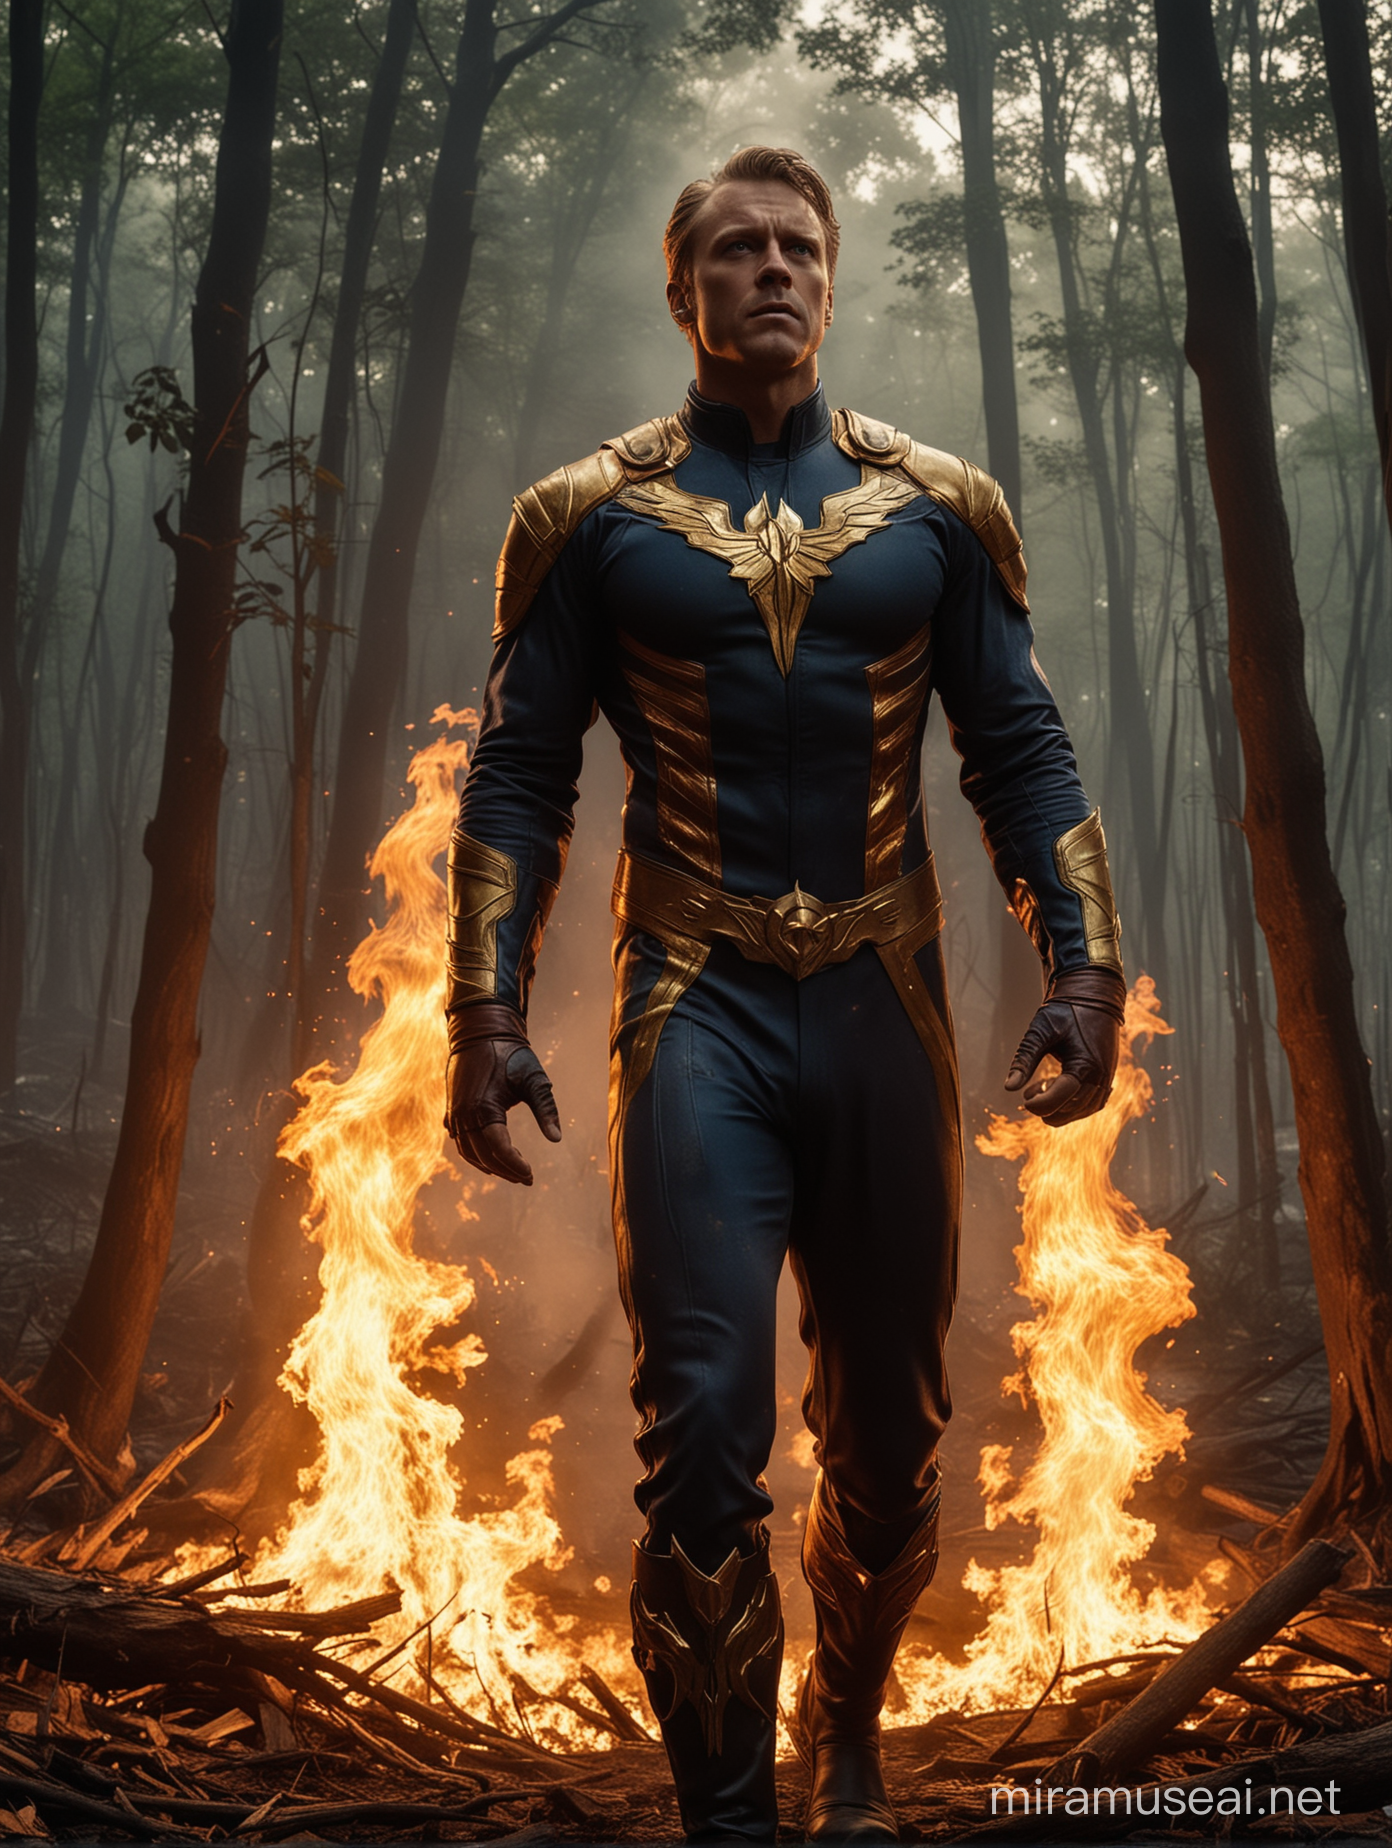 As Homelander emerges from the dense forest, flames lick at his clothing, casting an ominous glow against his chiseled features. His eyes, ablaze with fury, scan the surroundings with a predatory intensity. With each step, the ground seems to tremble beneath his imposing figure, as if nature itself recoils from his wrath. This scene, with its cinematic flair, sets the stage for a confrontation of epic proportions.